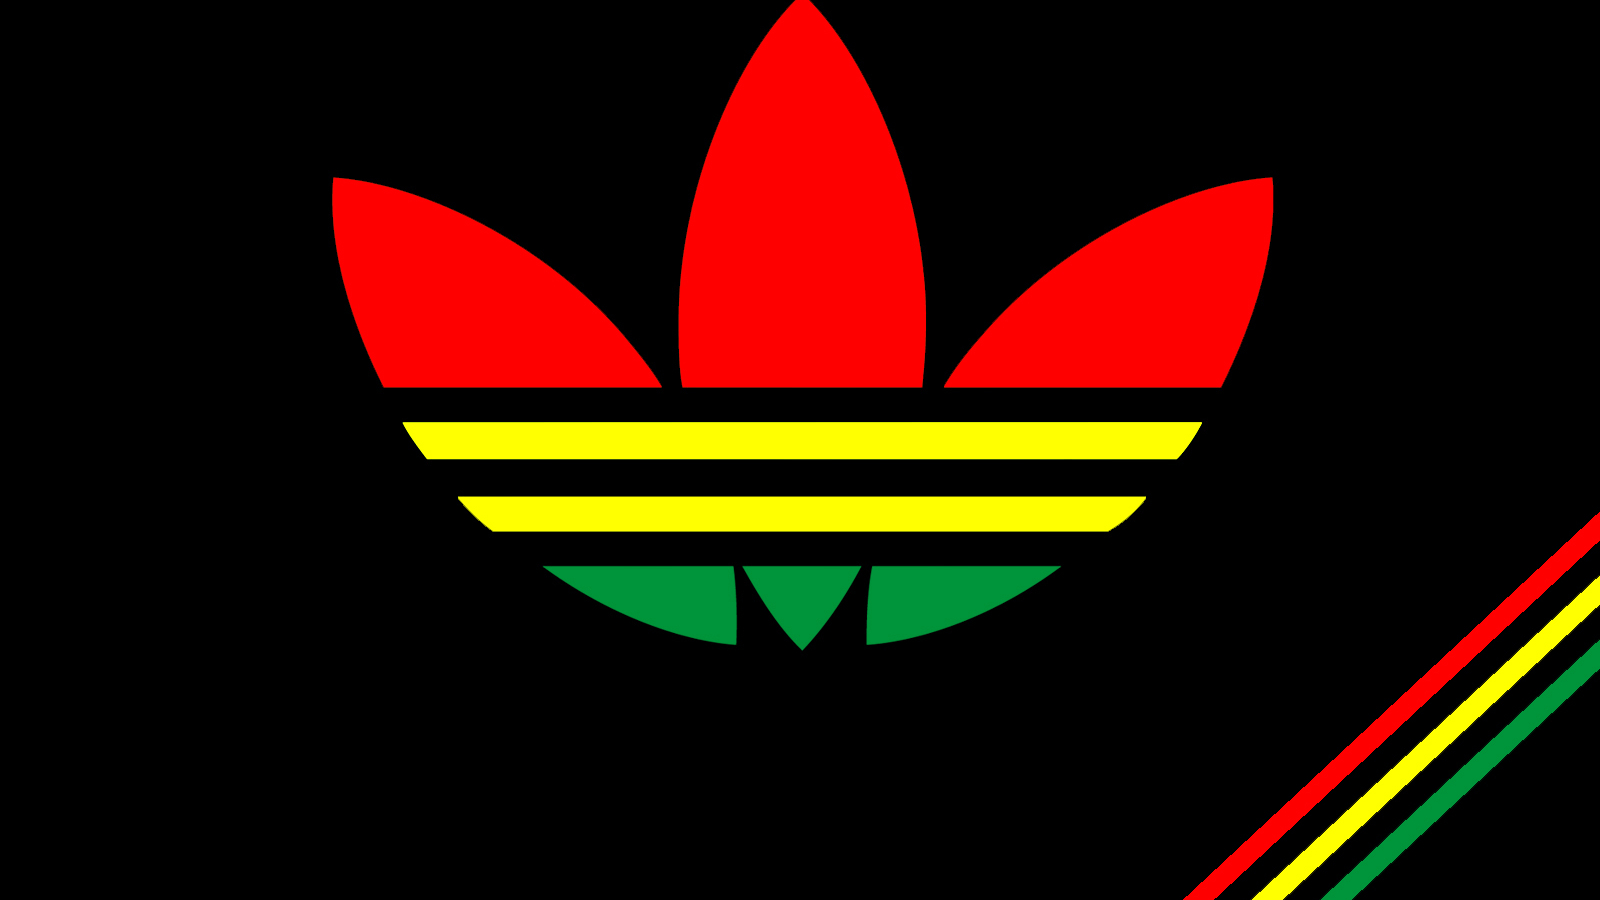 Adidas Red Phone Wallpapers